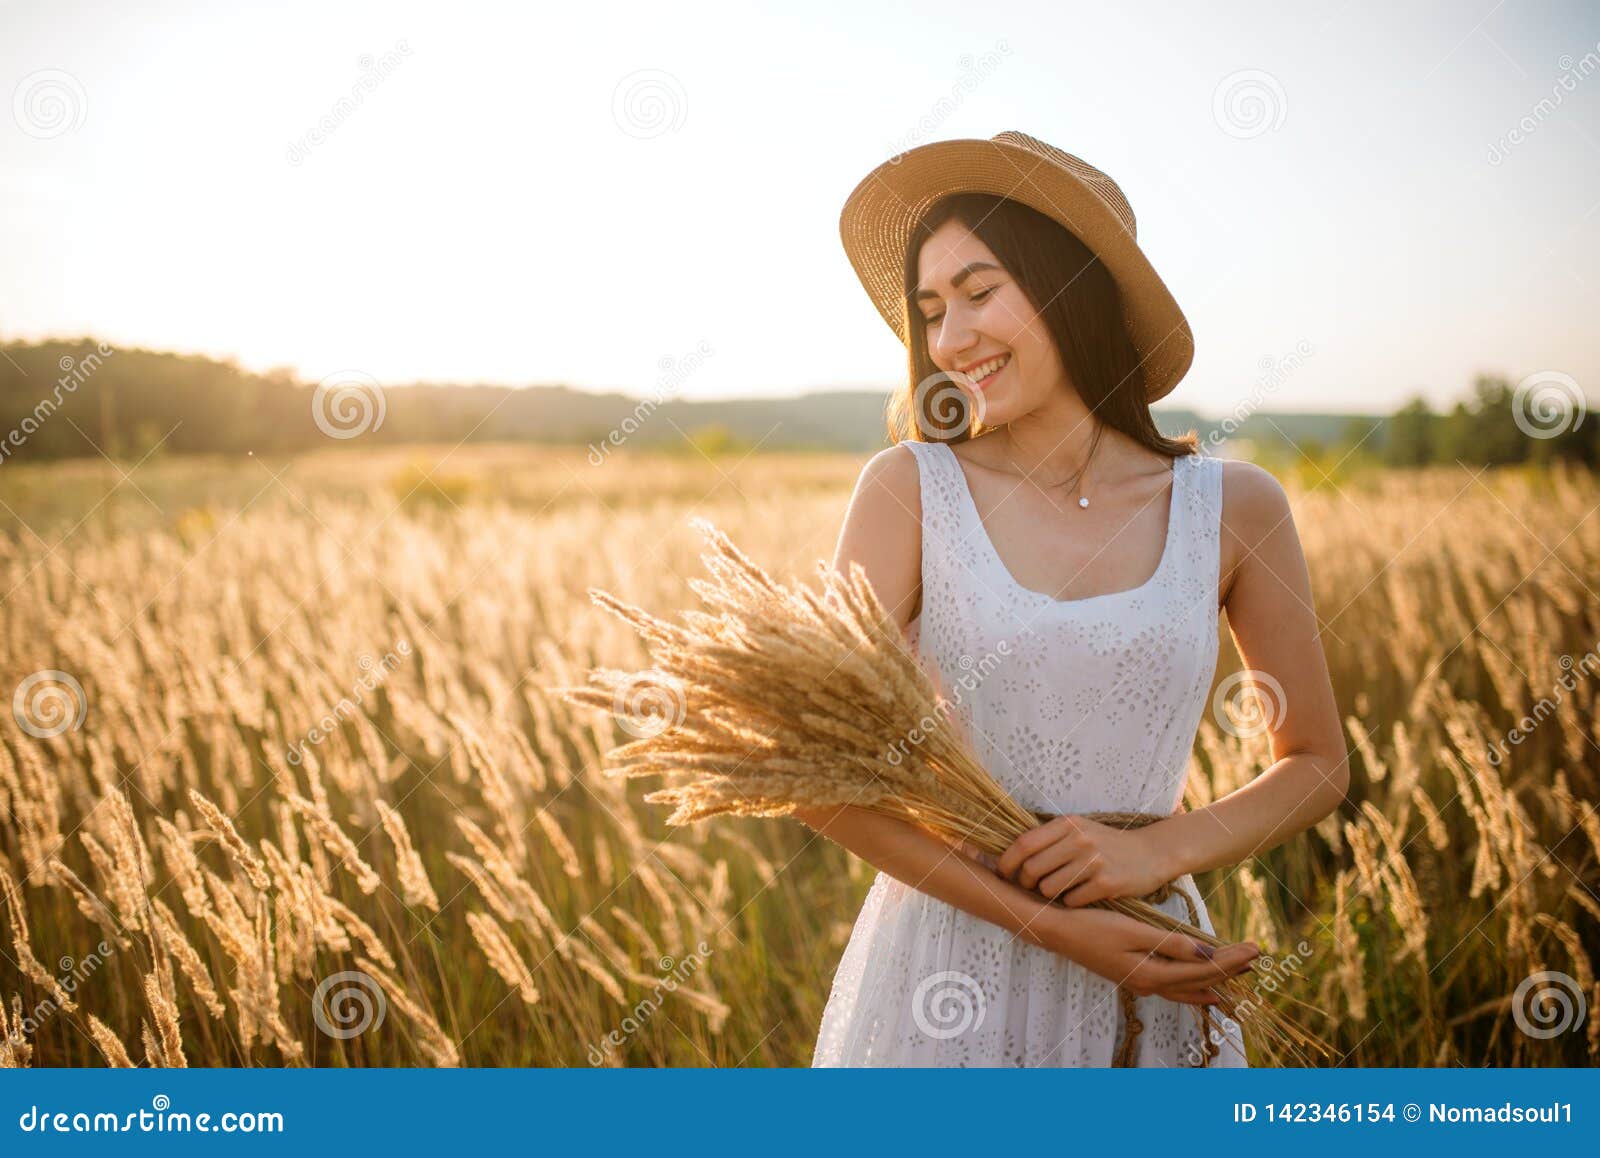 Cute Woman Harvests Wheat in the Field Stock Photo - Image of dress ...